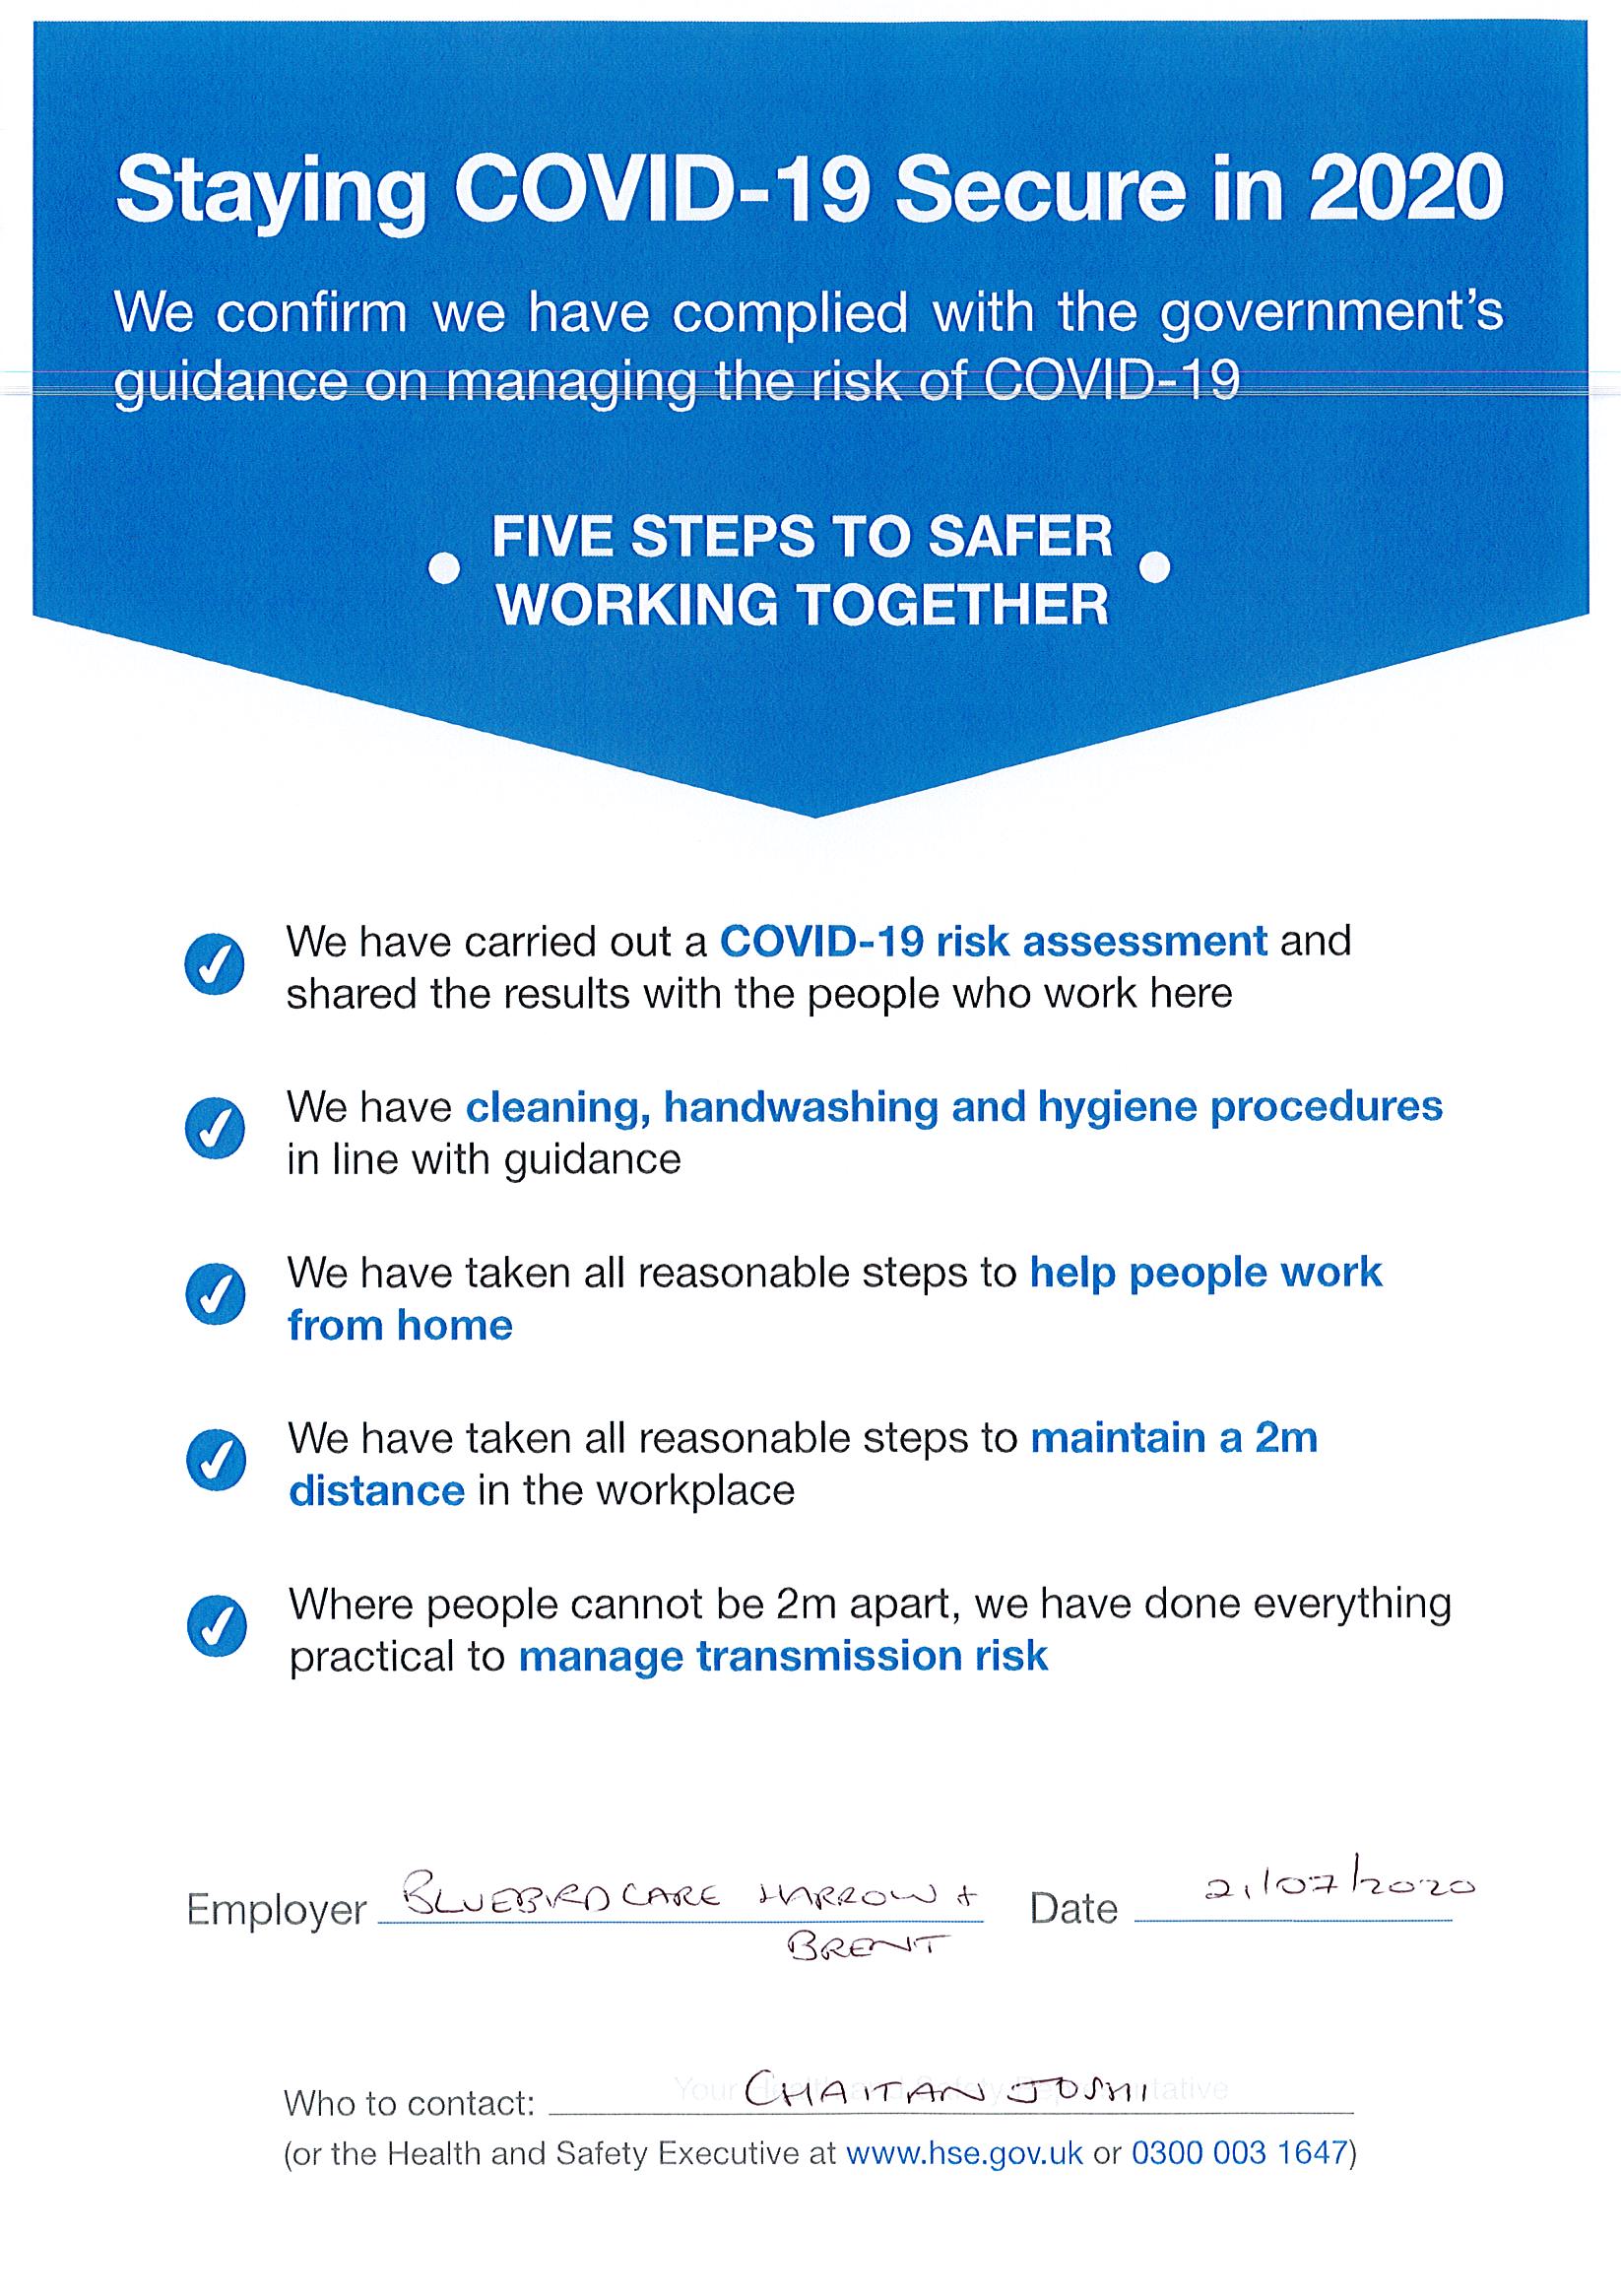 Staying COVID-19 Secure in Harrow